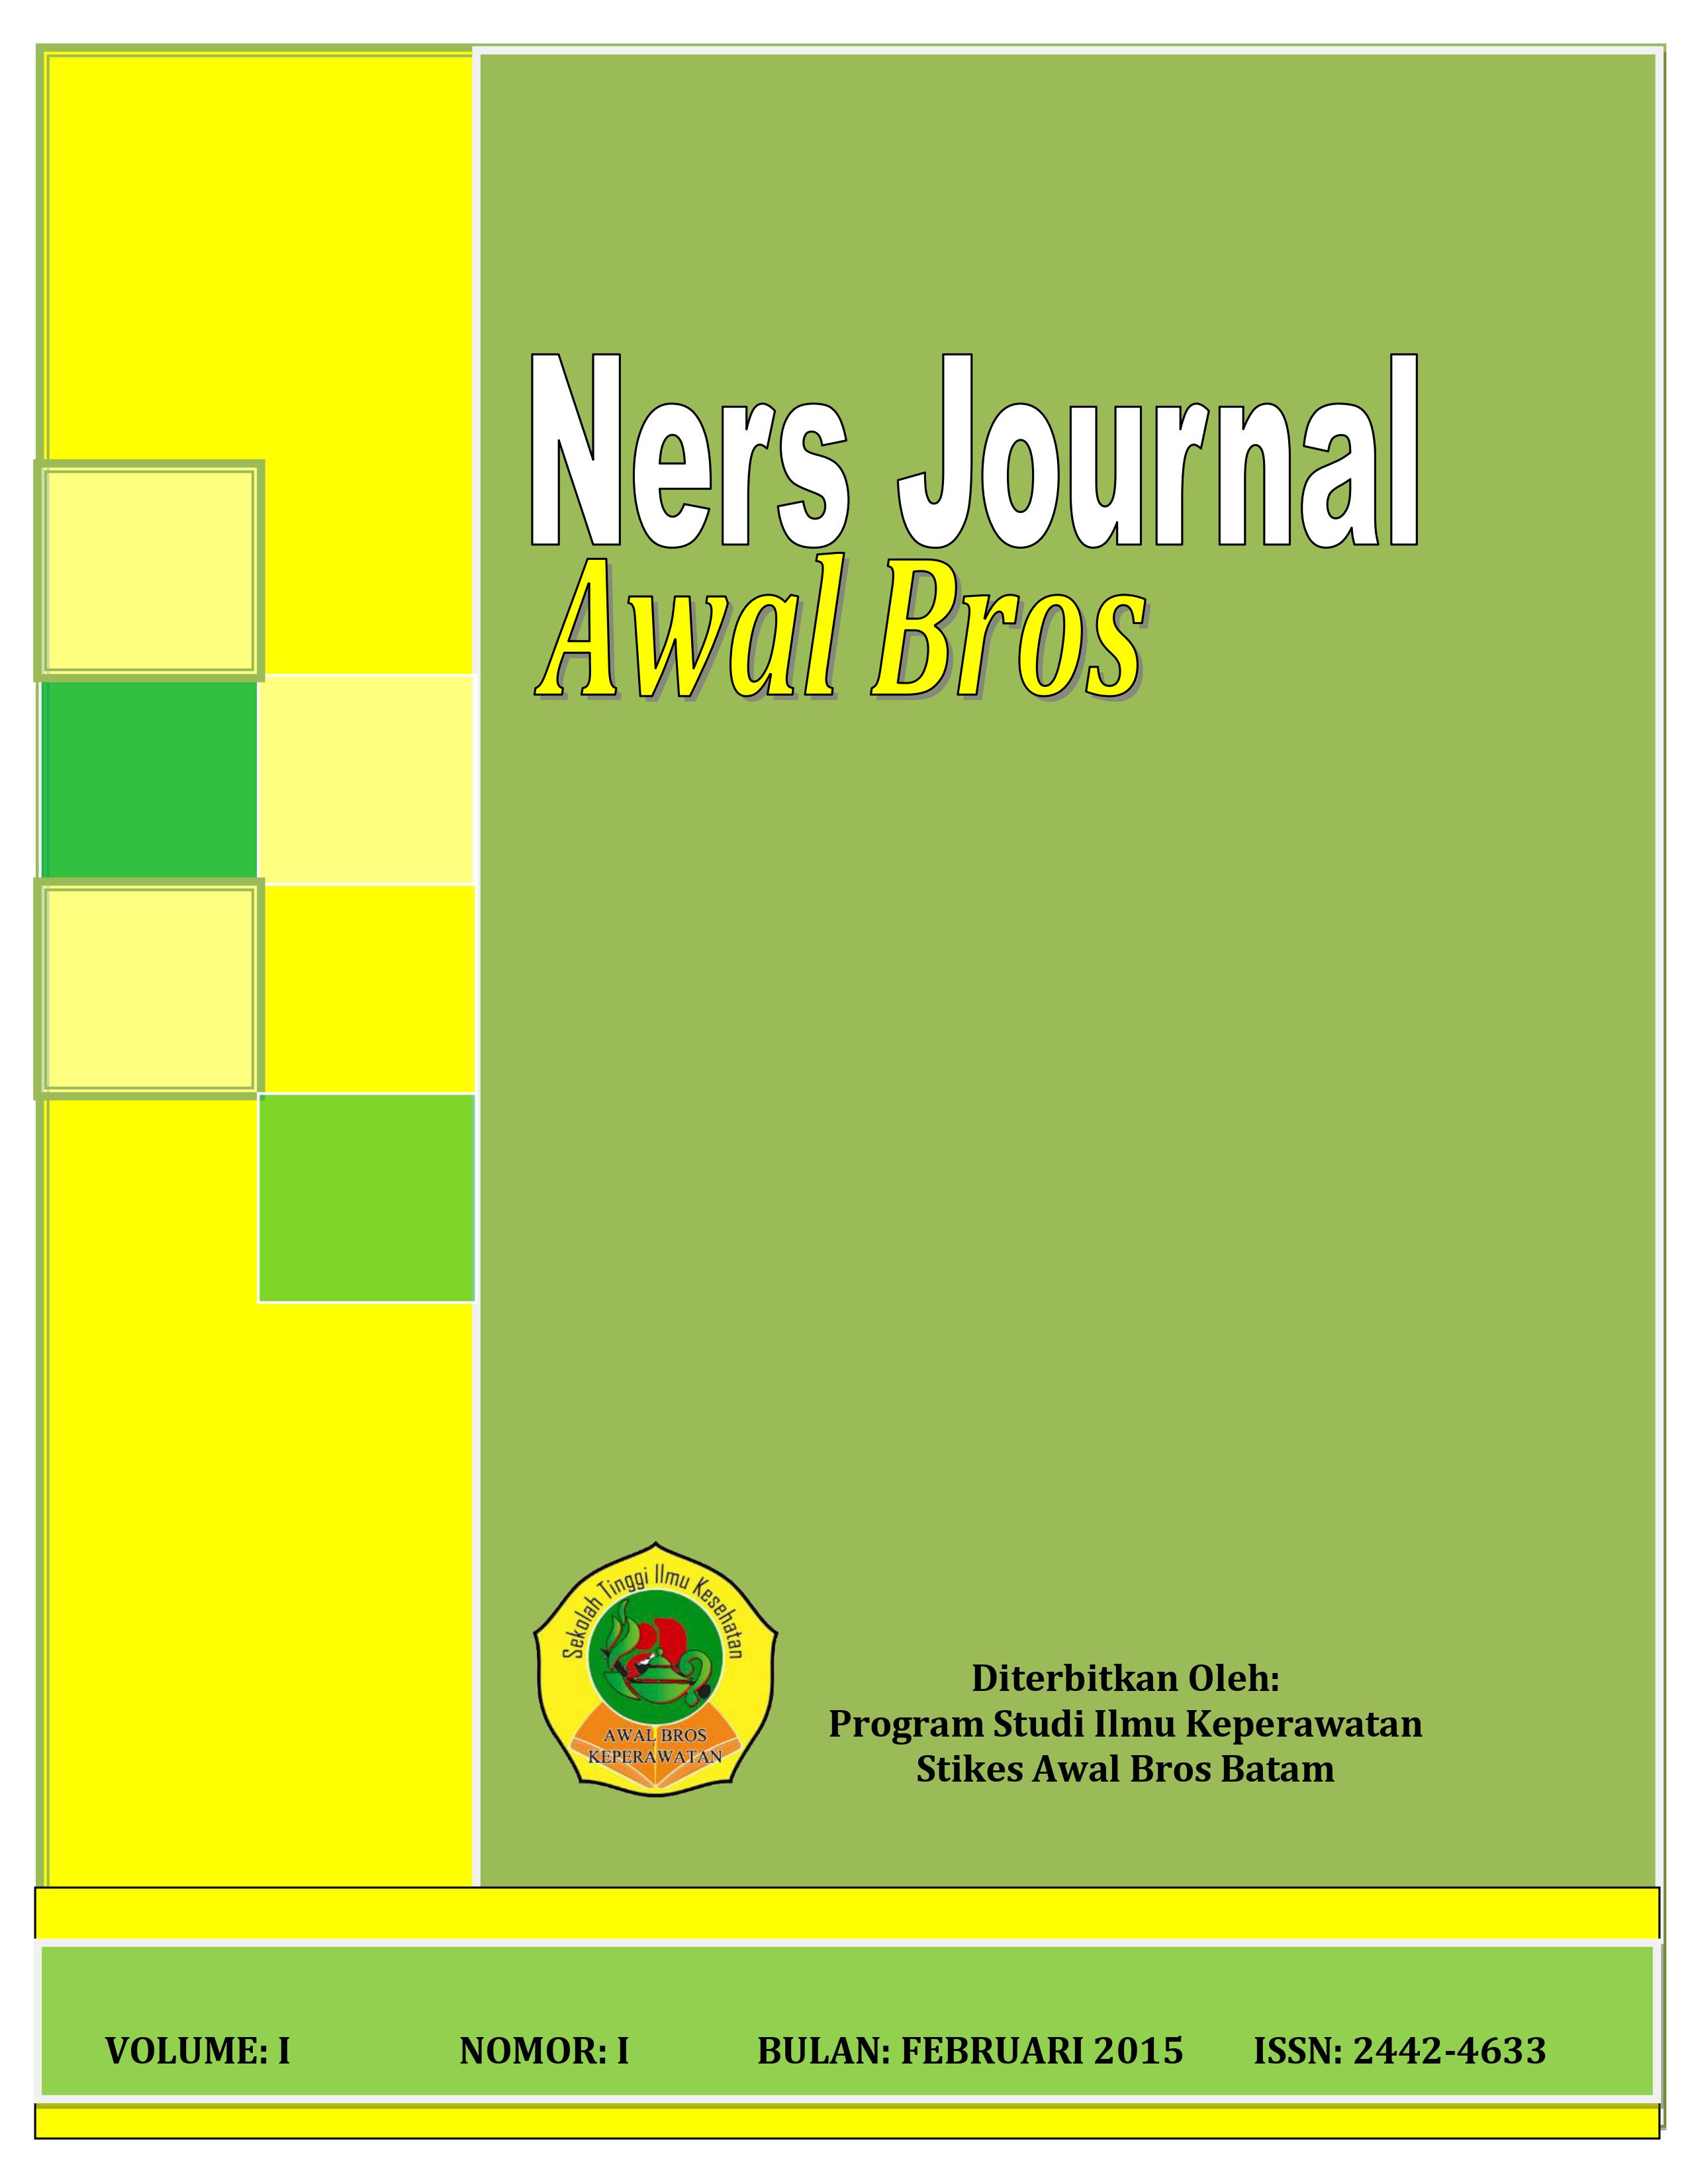 Ners Journal